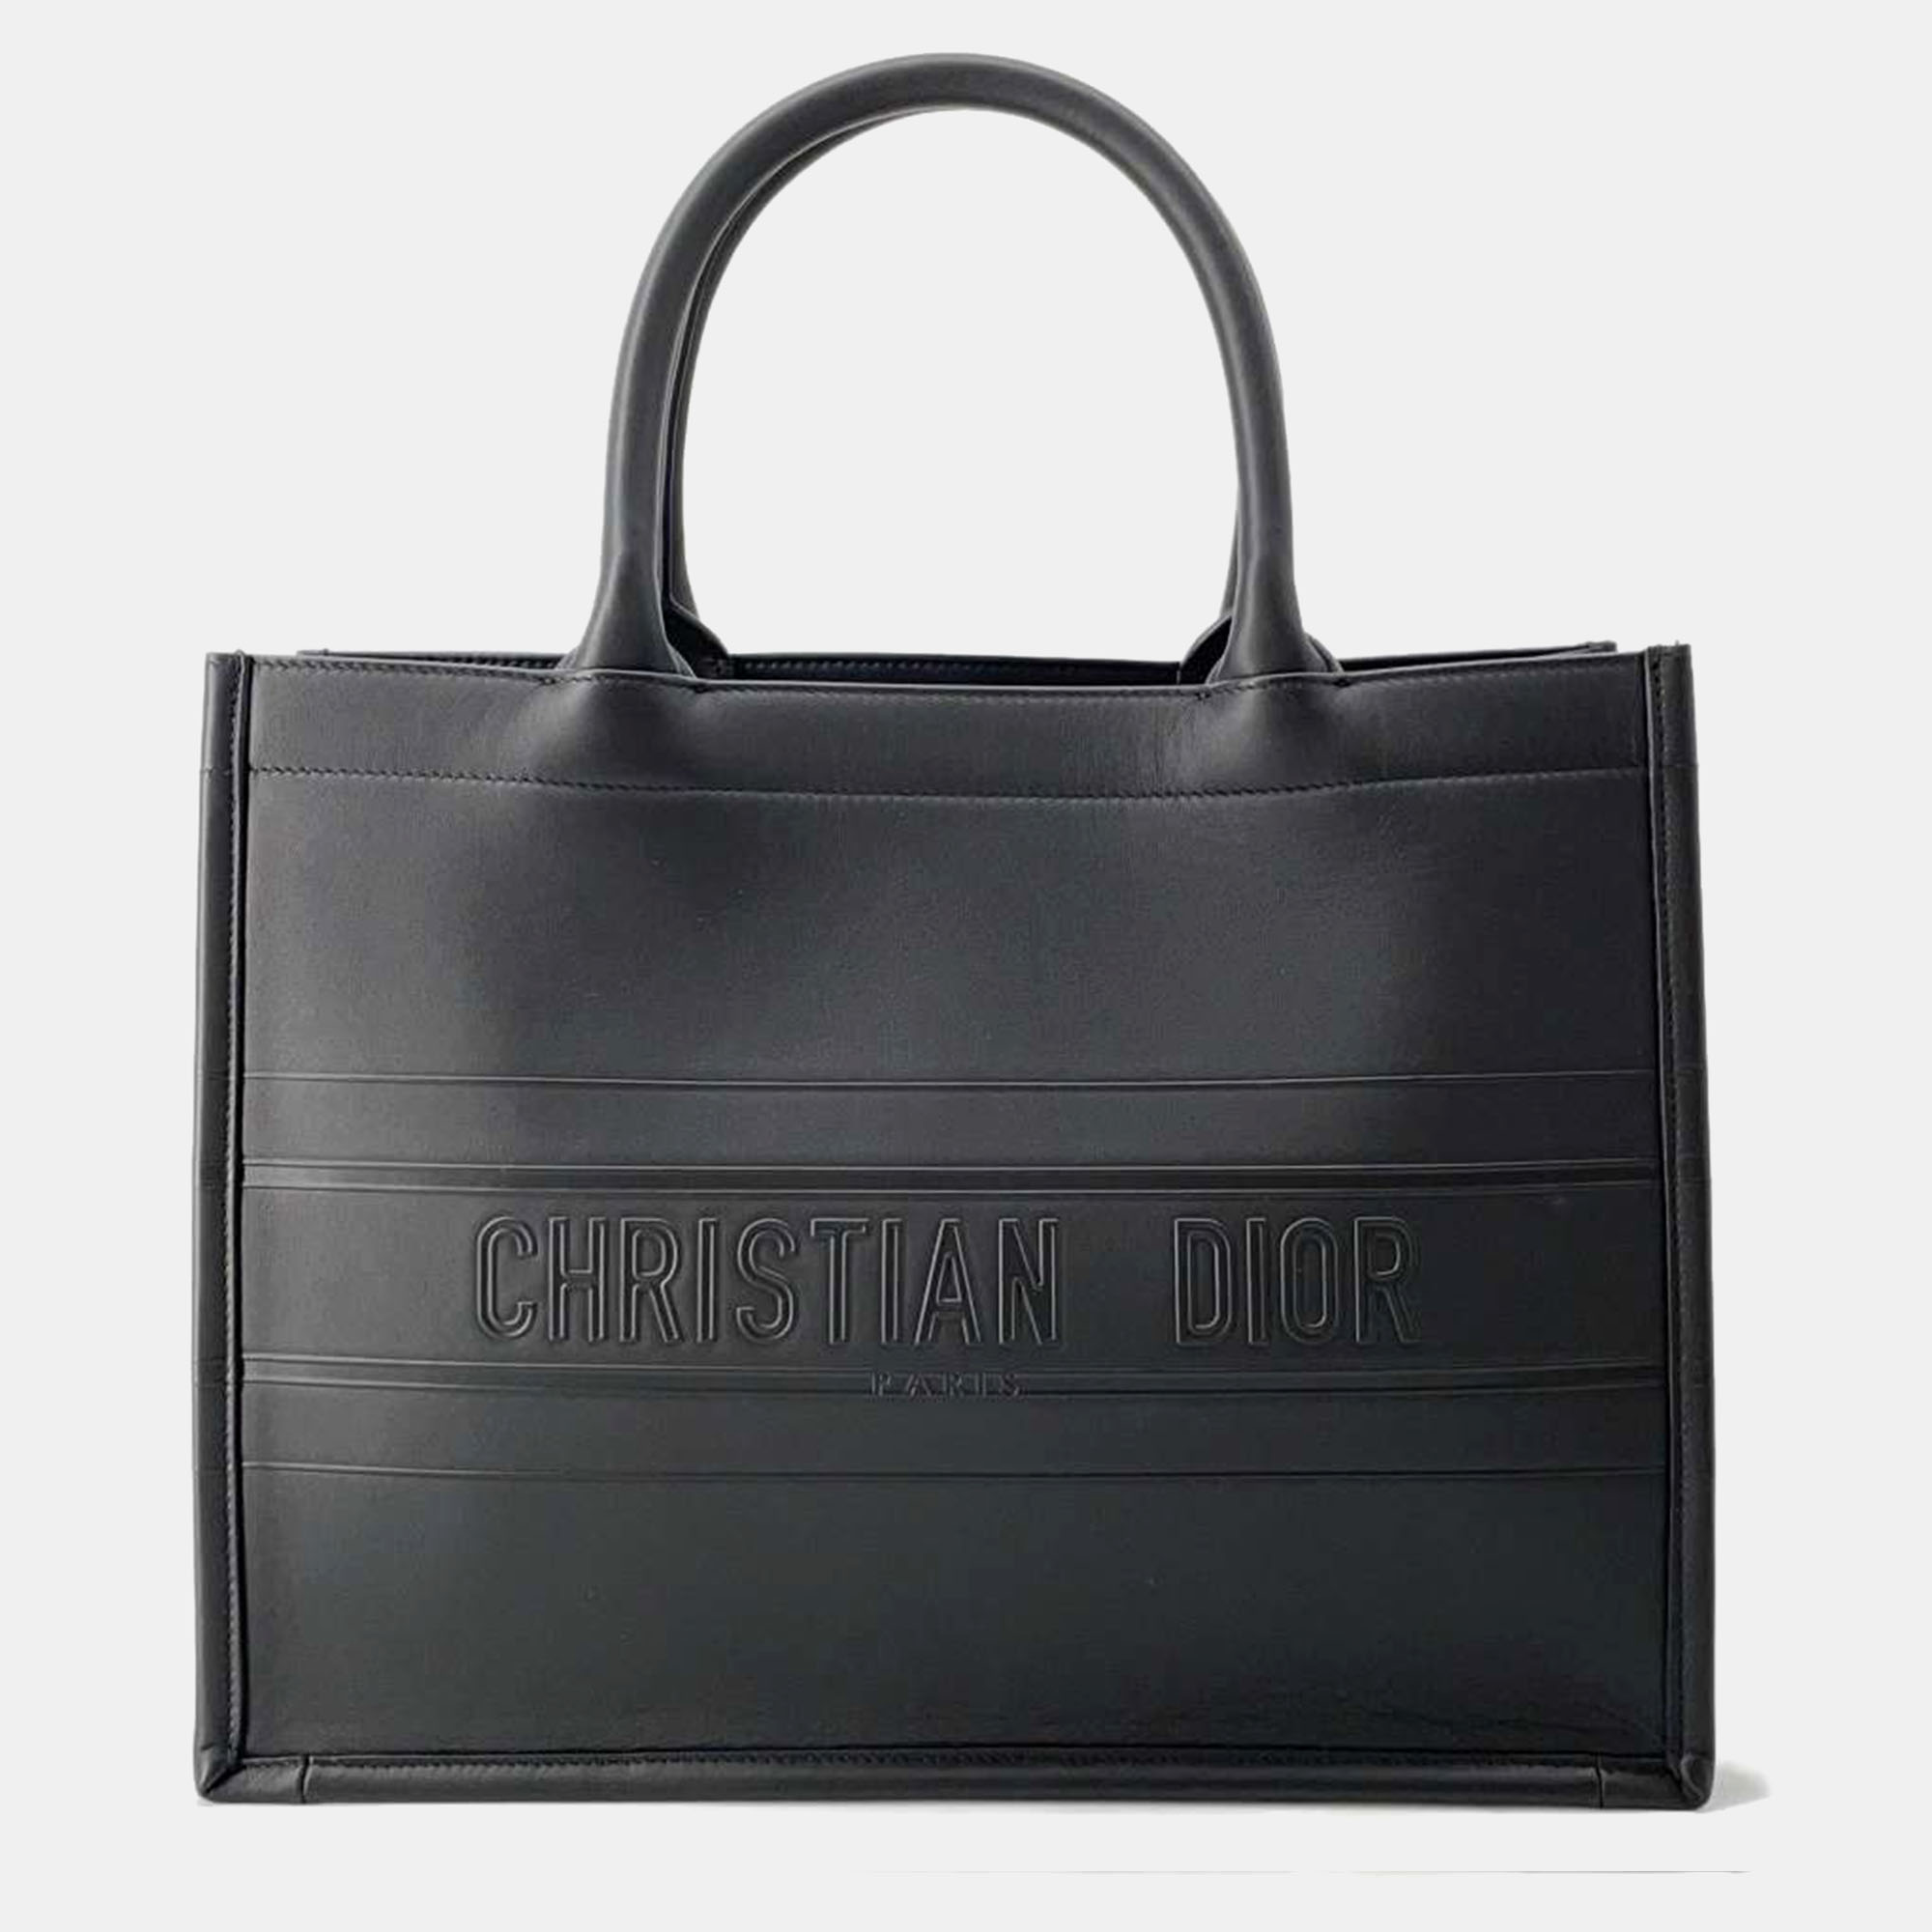 Elevate your every day with this Dior tote. Meticulously designed it seamlessly blends functionality with luxury offering the perfect accessory to showcase your discerning style while effortlessly carrying your essentials.